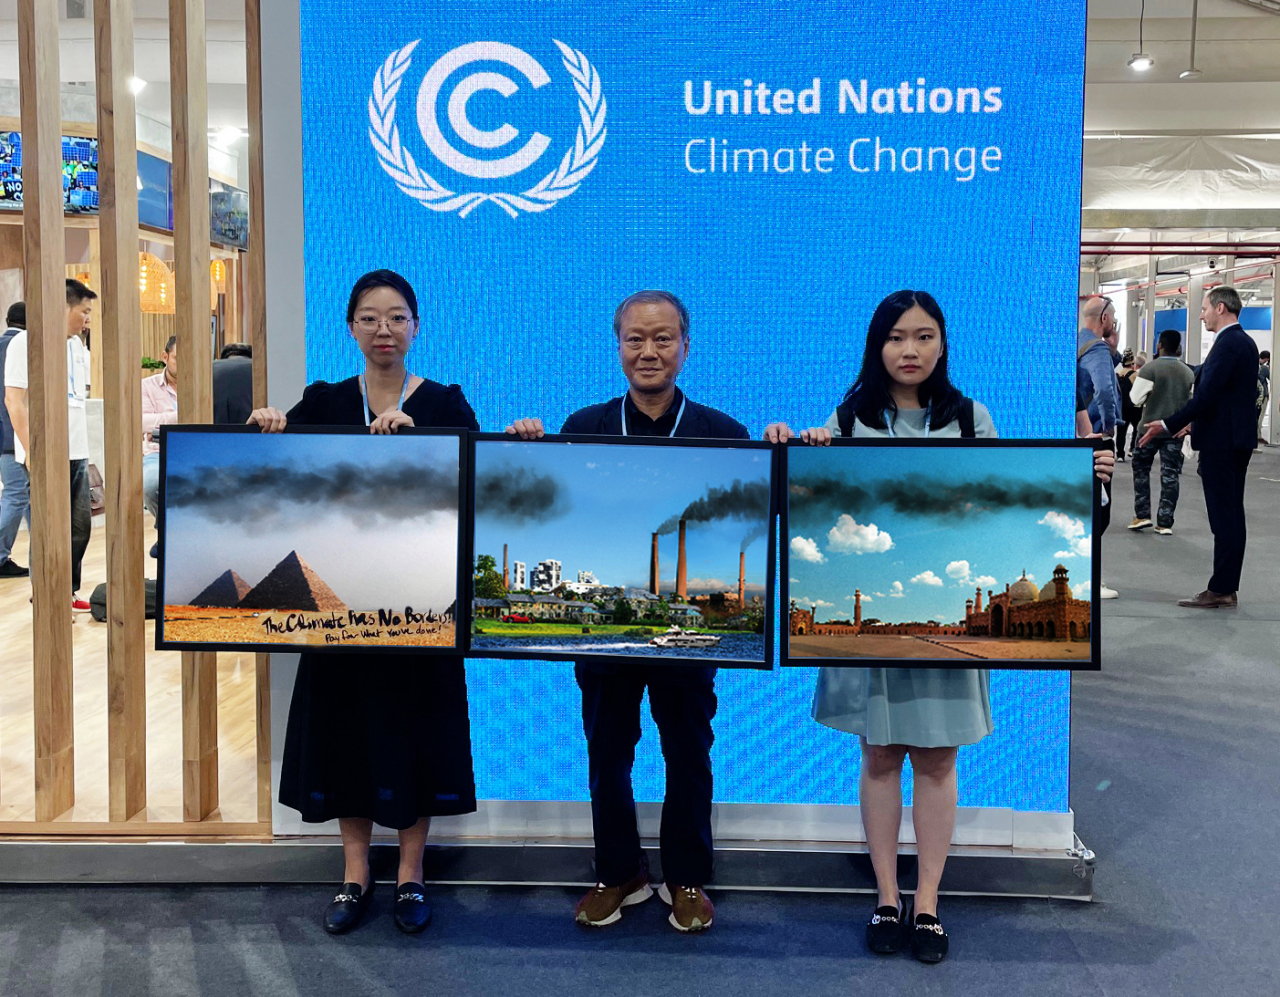 At the 21st Conference of the Parties (COP21) held in Paris in 2015, activists hold up a selection of photos to illustrate the message 